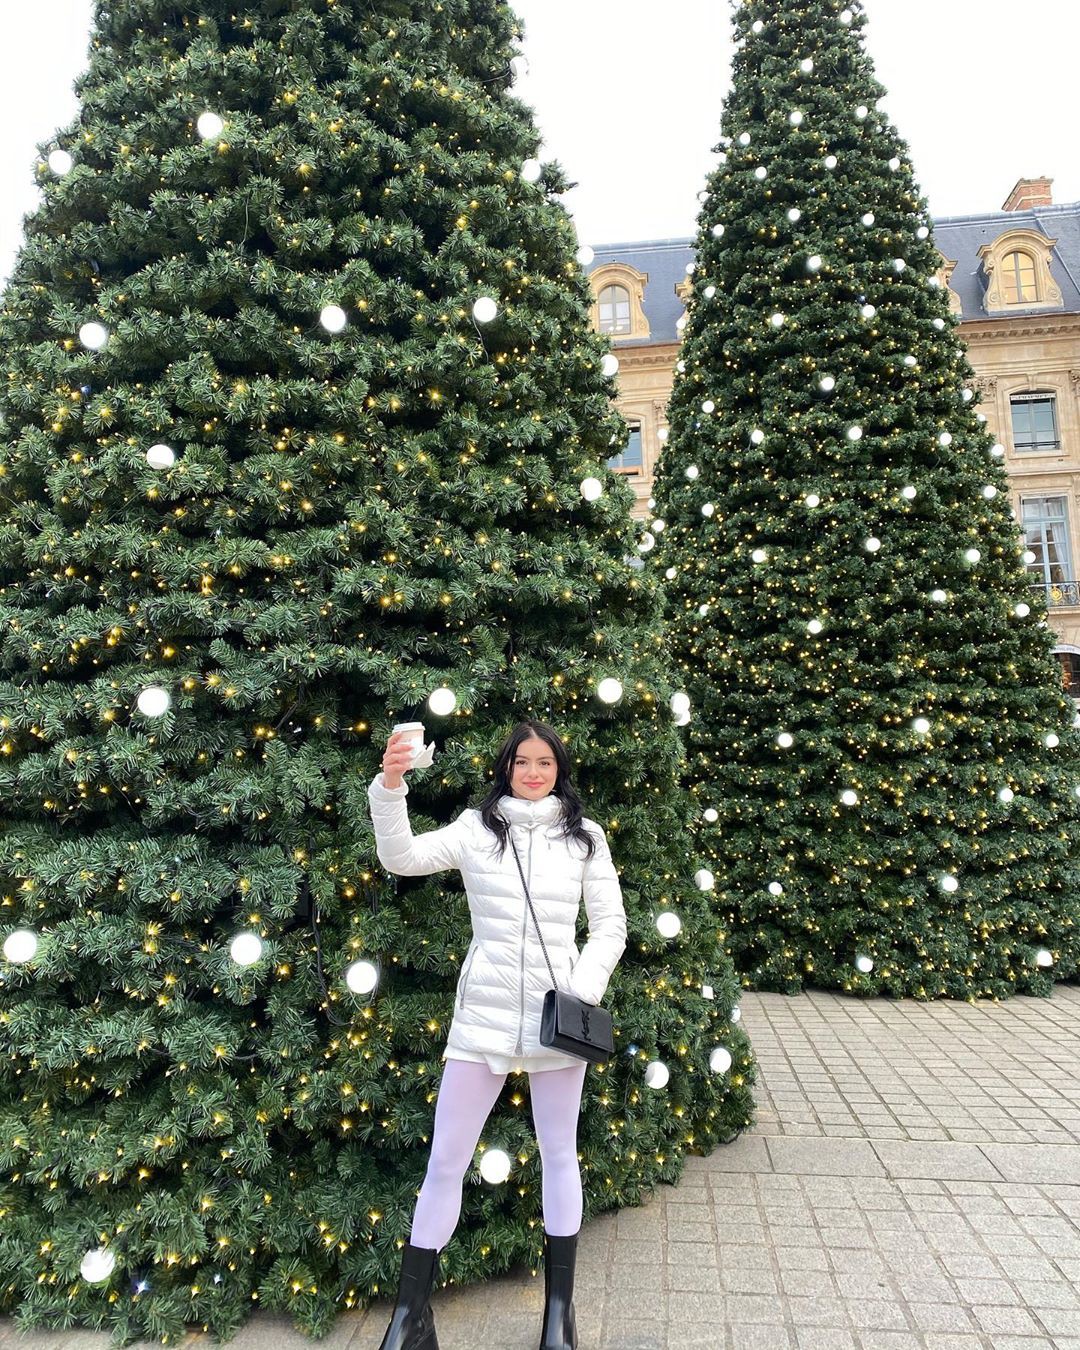 Pretty ideas for christmas tree, The Christmas Chronicles: Christmas Day,  Christmas tree,  Christmas lights,  Christmas decoration,  Ariel Winter,  Hot Instagram Models  